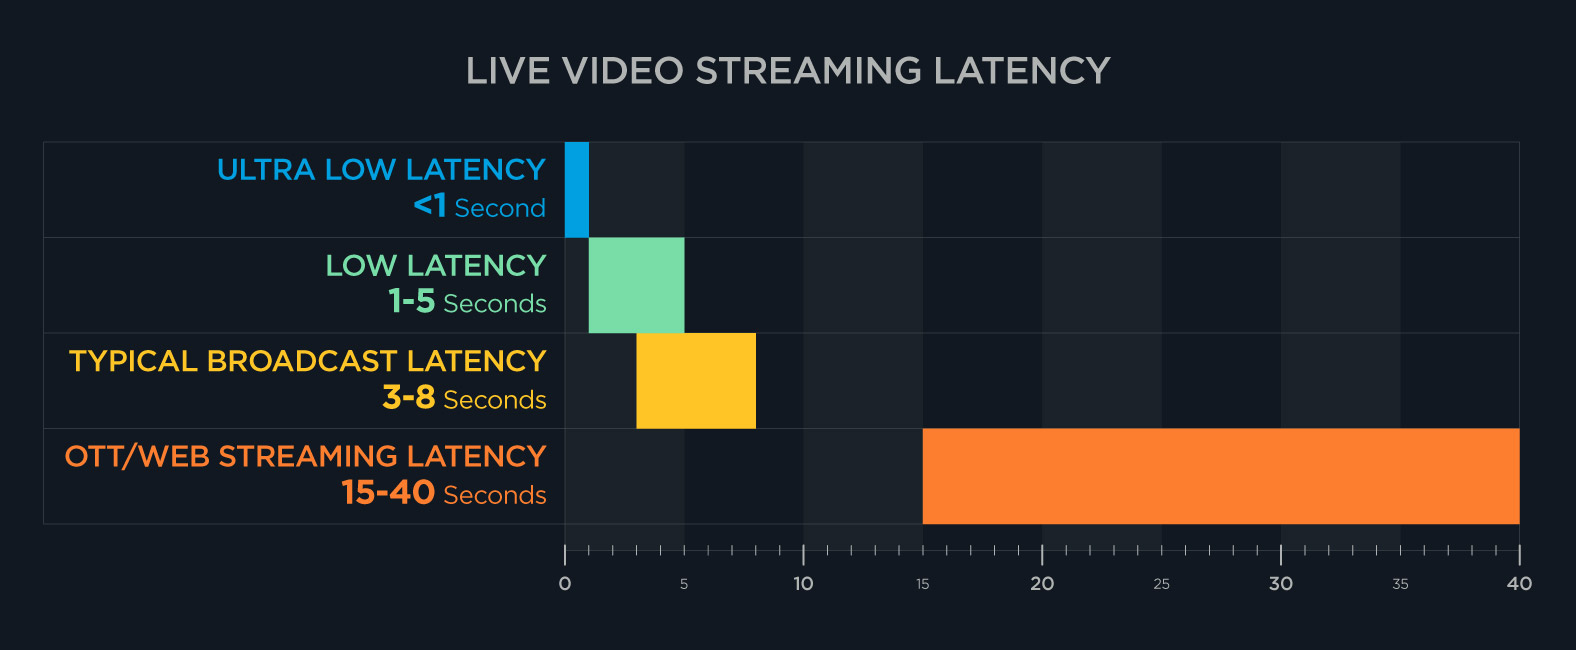 Live video streaming latency